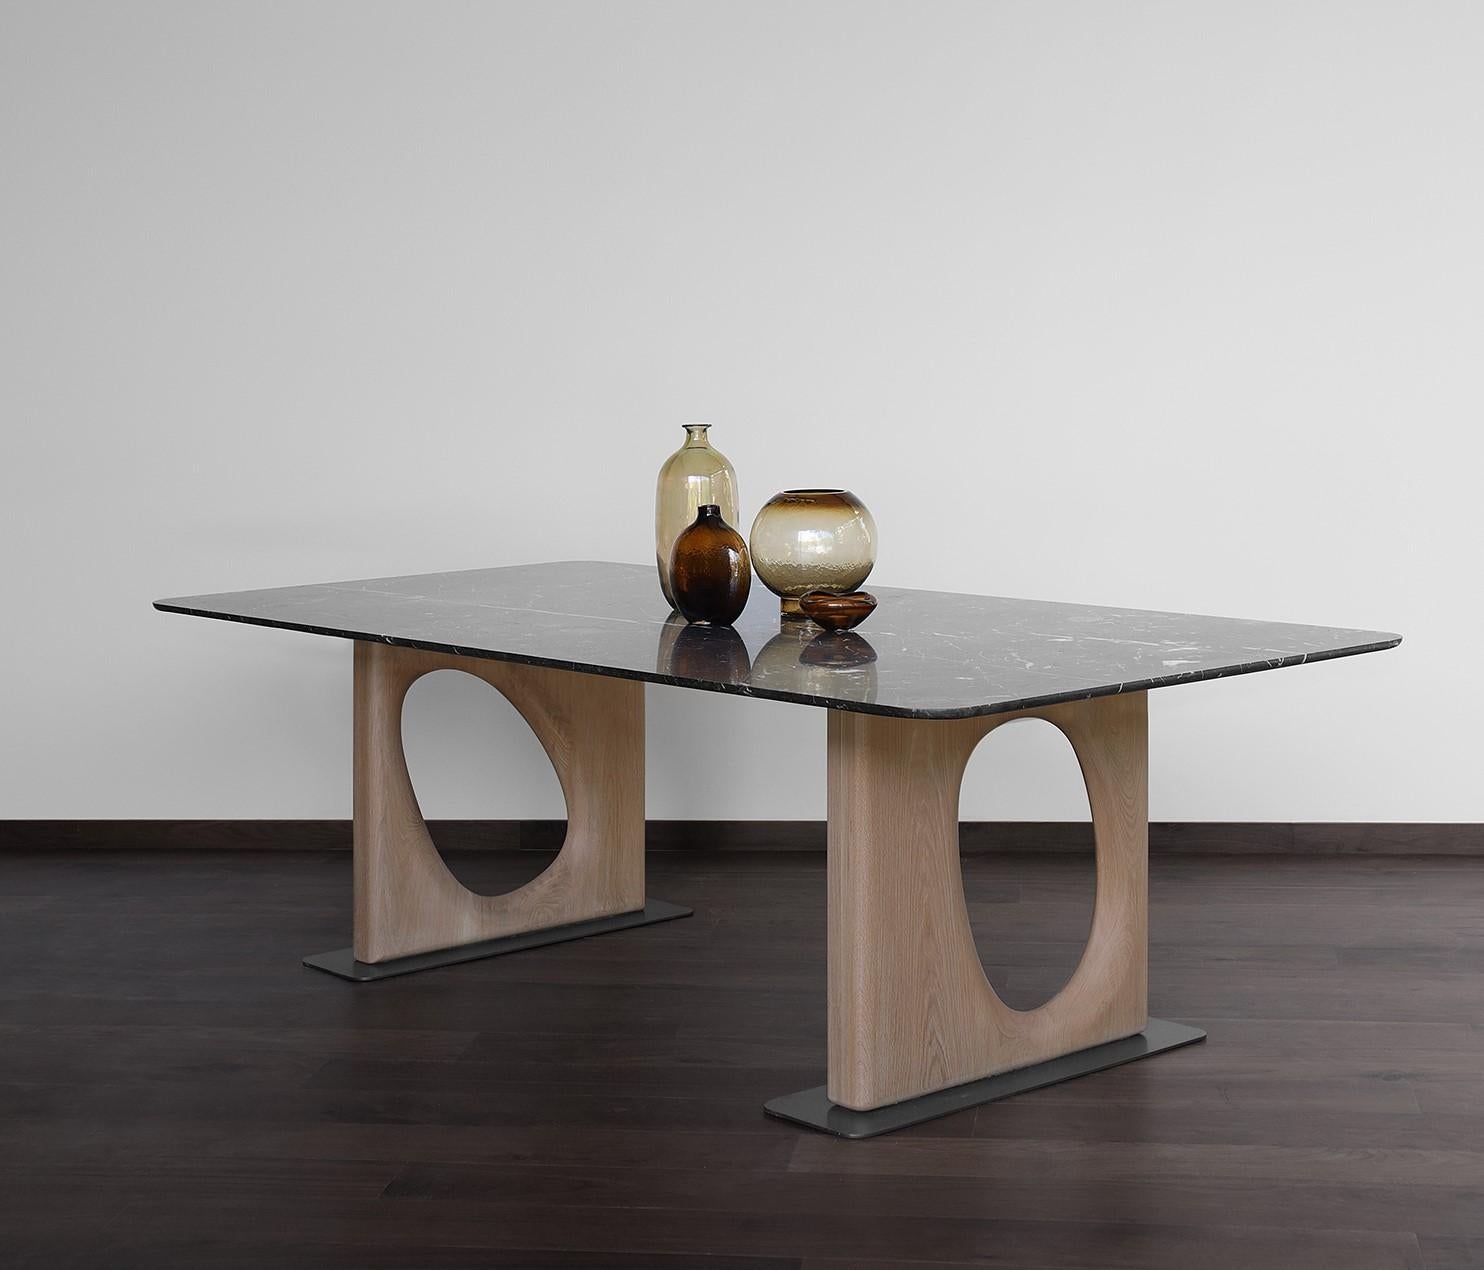 XII Doceava dining table by Joel Escalona.
Dimensions: D 240 x W 120 x H 78 cm
Materials: oak wood, metal, Negro Monterrey marble.

White oak with metal base and Negro Monterrey marble top dining table.

Joel Escalona
He was born in Mexico